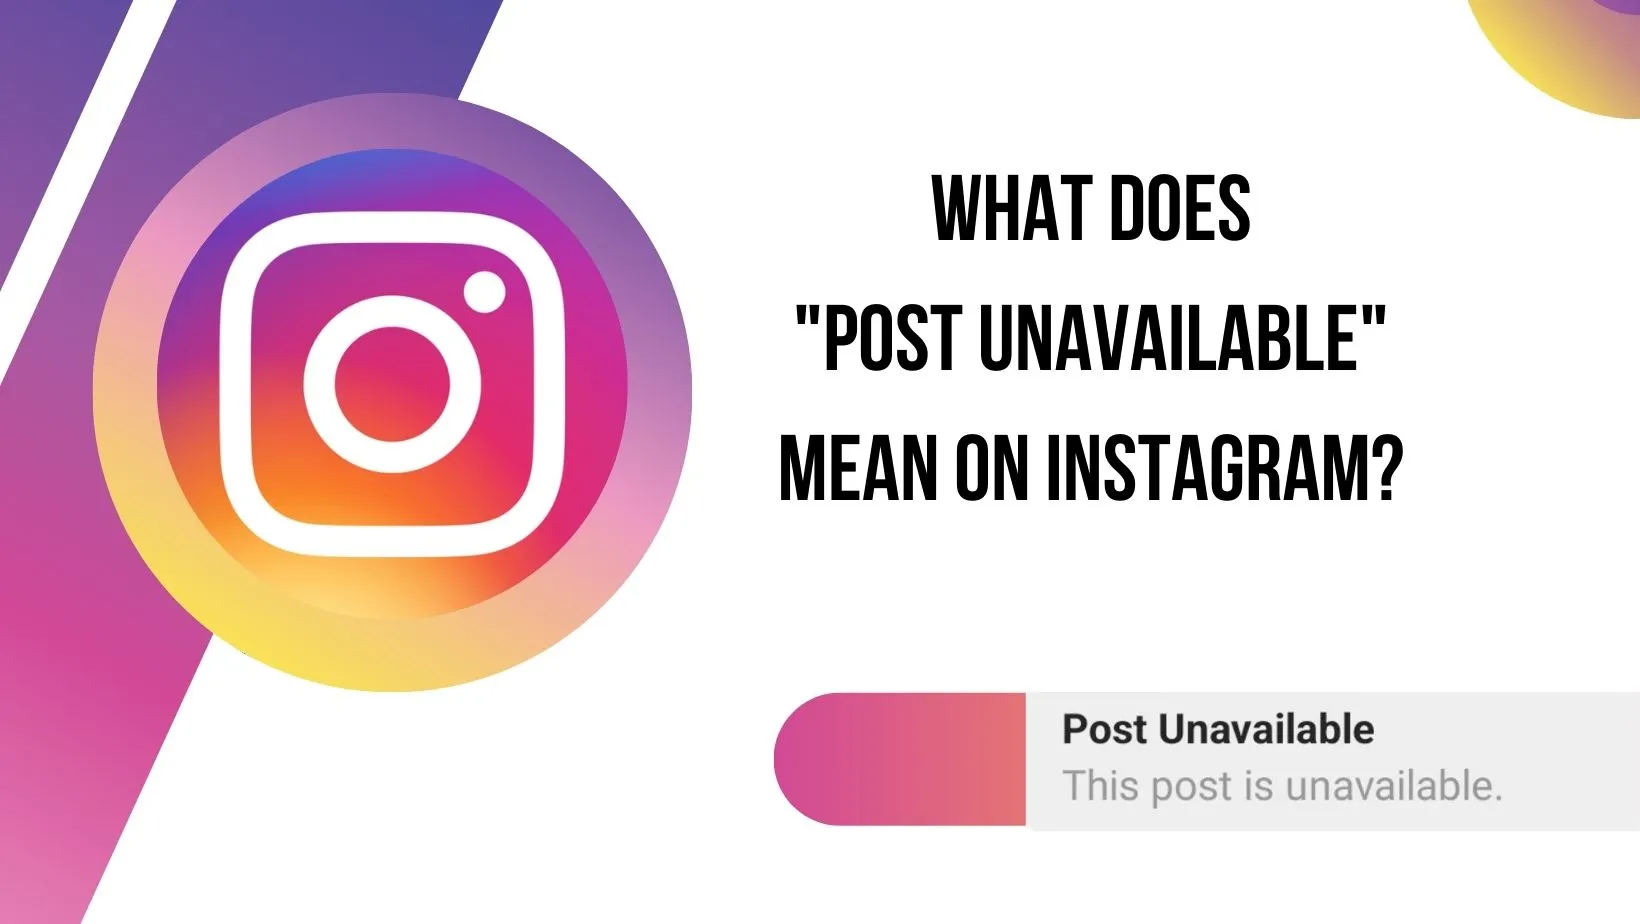 What does Post Unavailable mean on Instagram